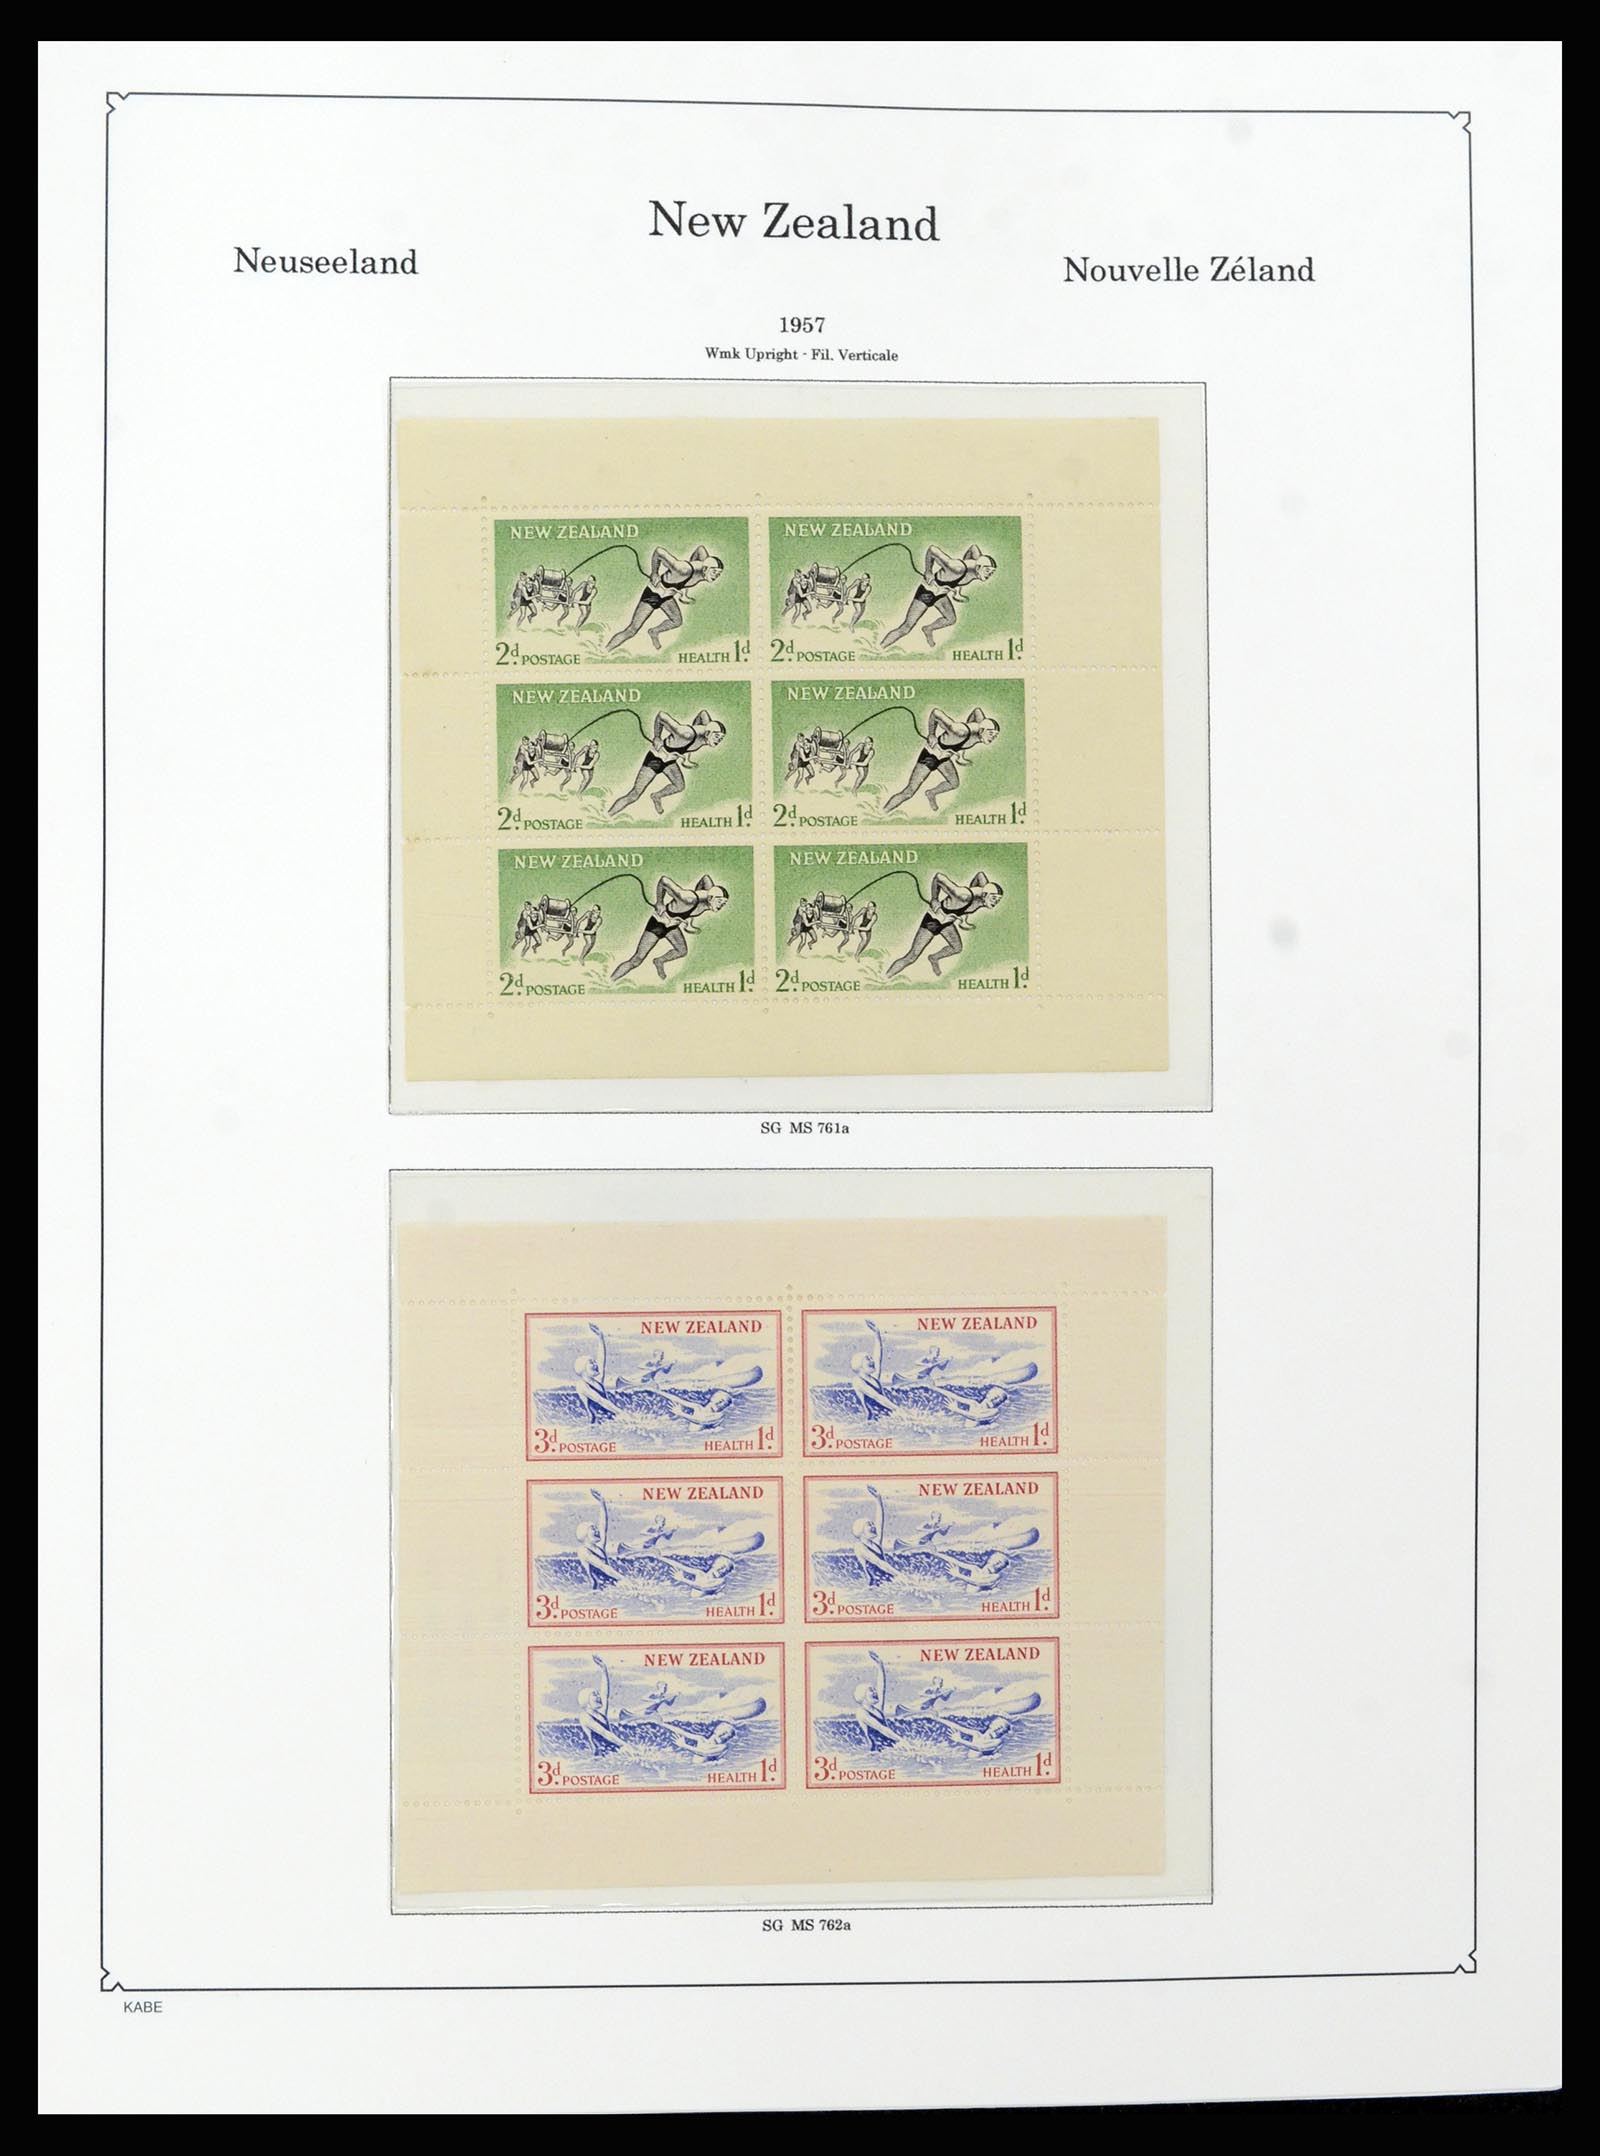 37148 029 - Stamp collection 37148 New Zealand specialised collection 1953-1995.